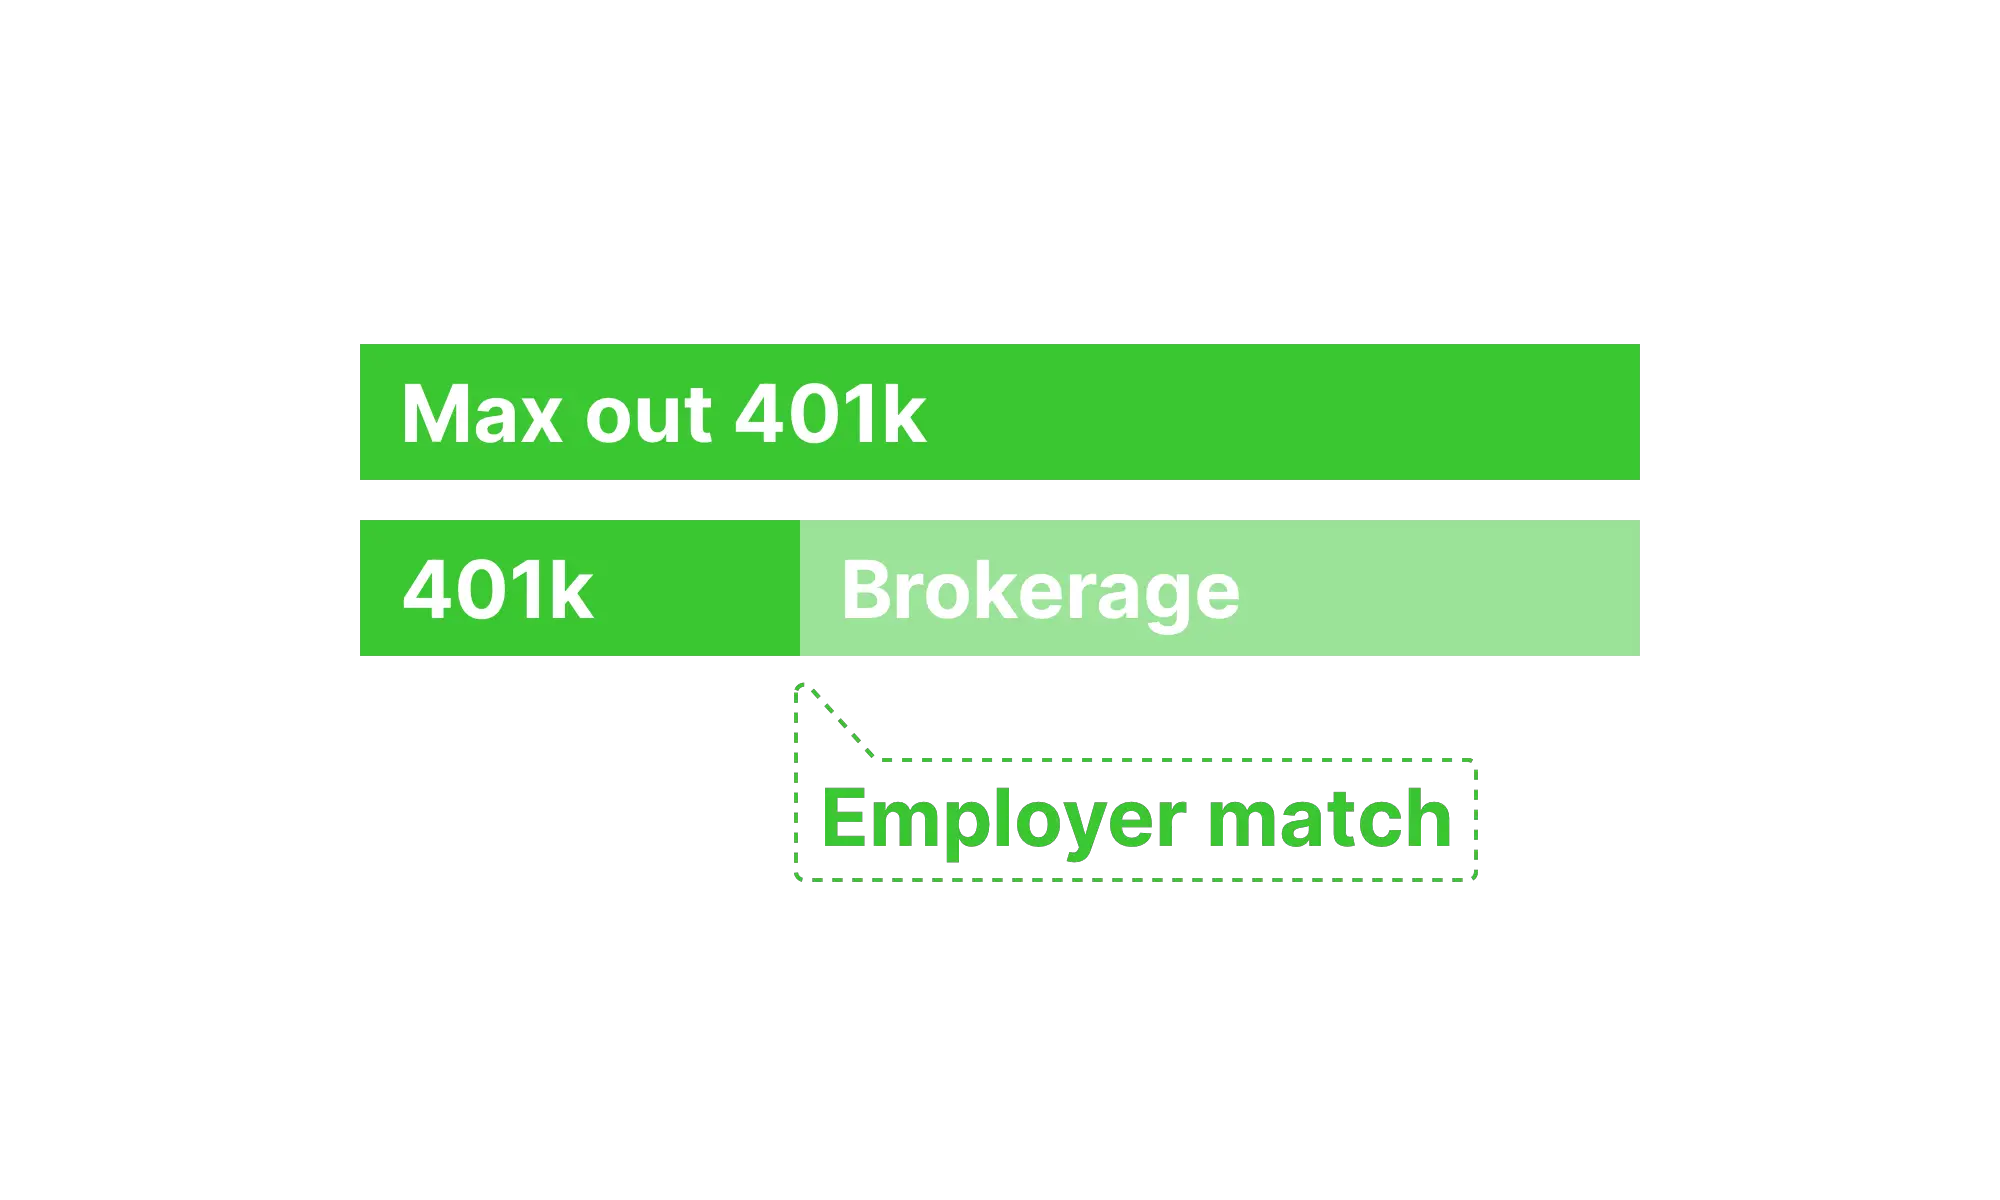 Should you max out your 401k? Here’s why I’m not maxing out my 401k